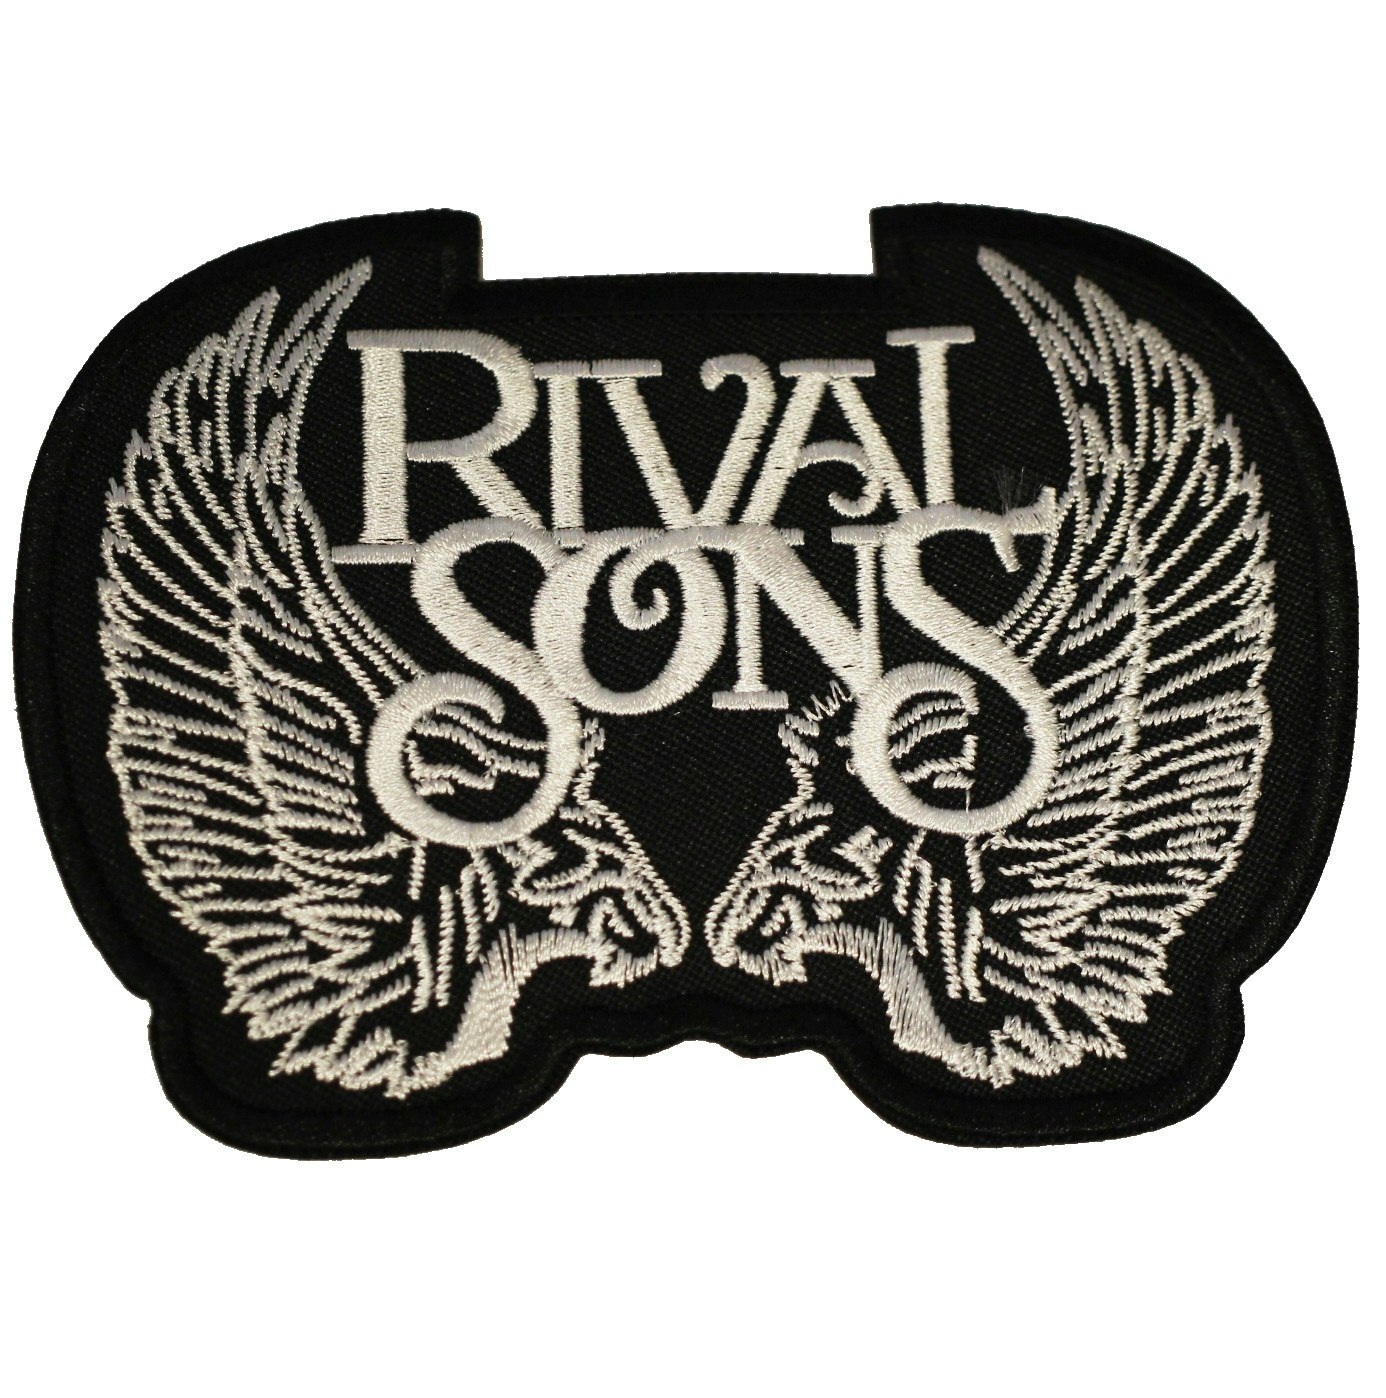 Rival sons wings logo patch